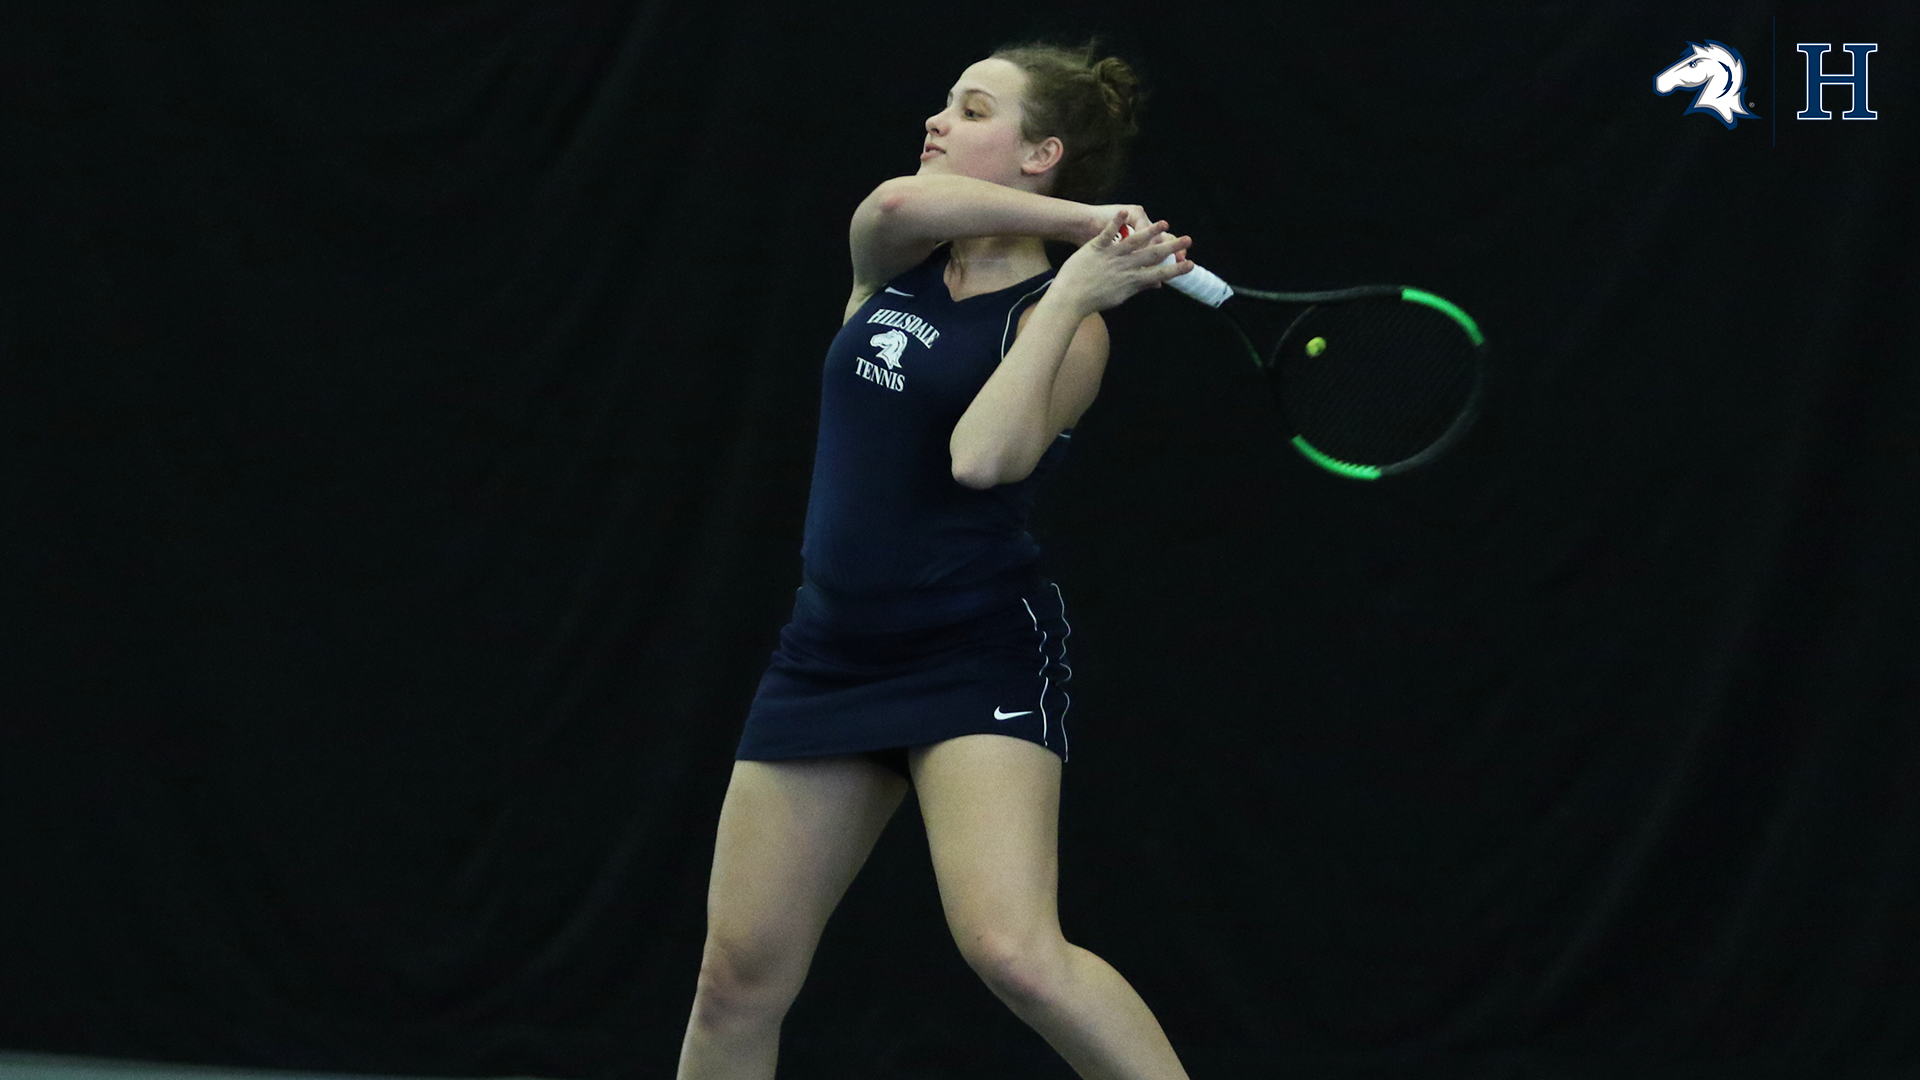 Charger women's tennis team loses close match to Tiffin, 4-2